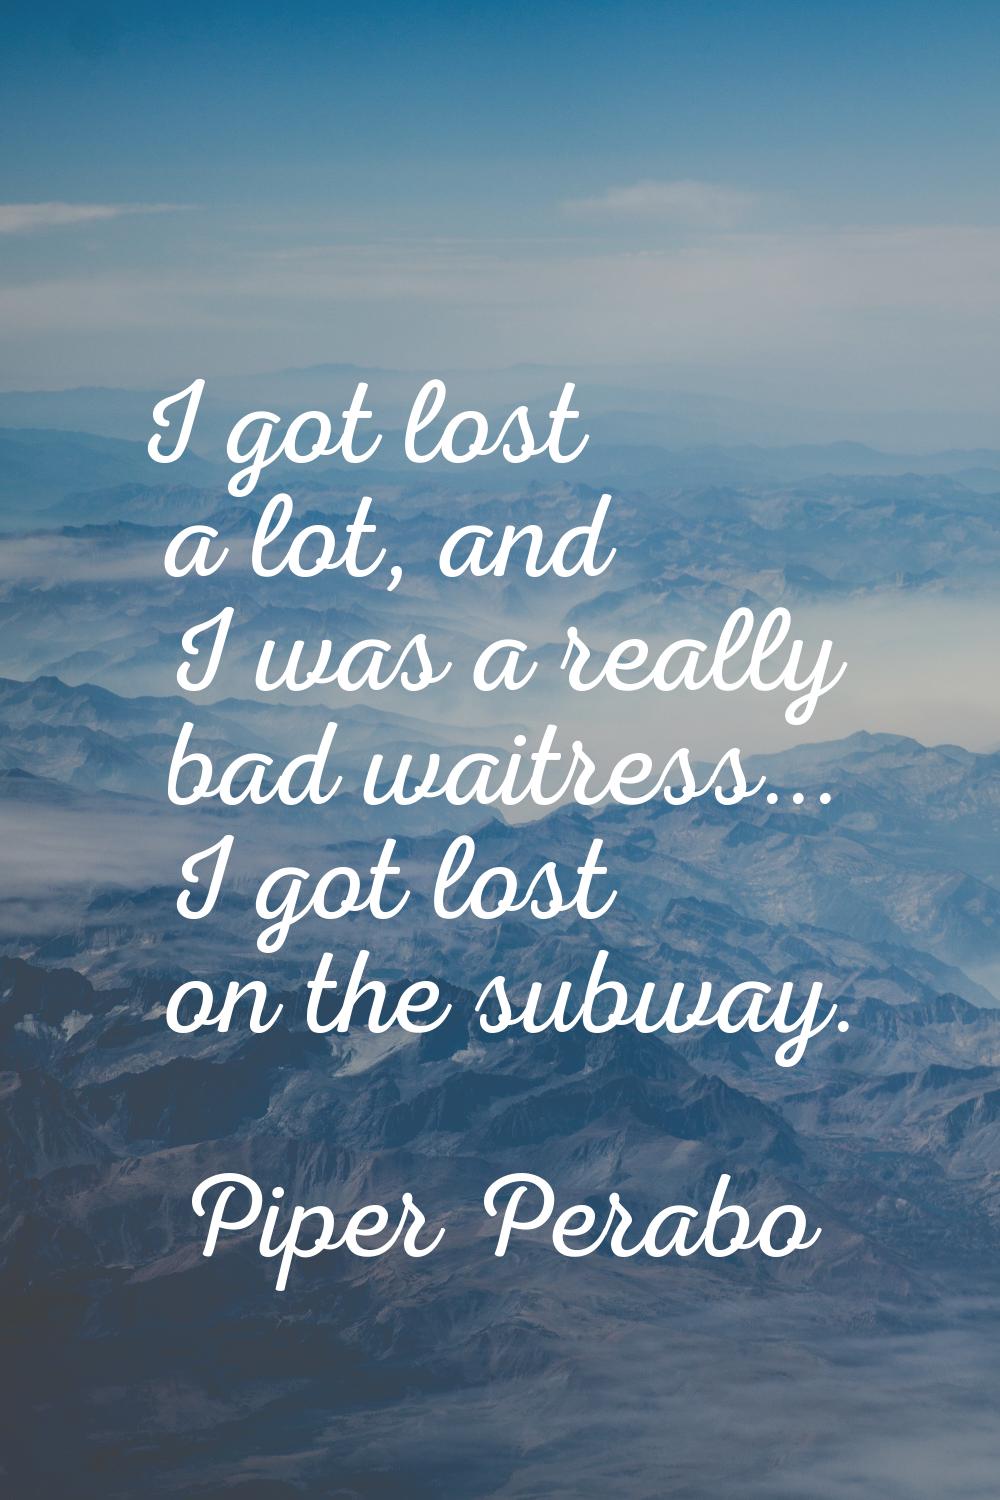 I got lost a lot, and I was a really bad waitress... I got lost on the subway.